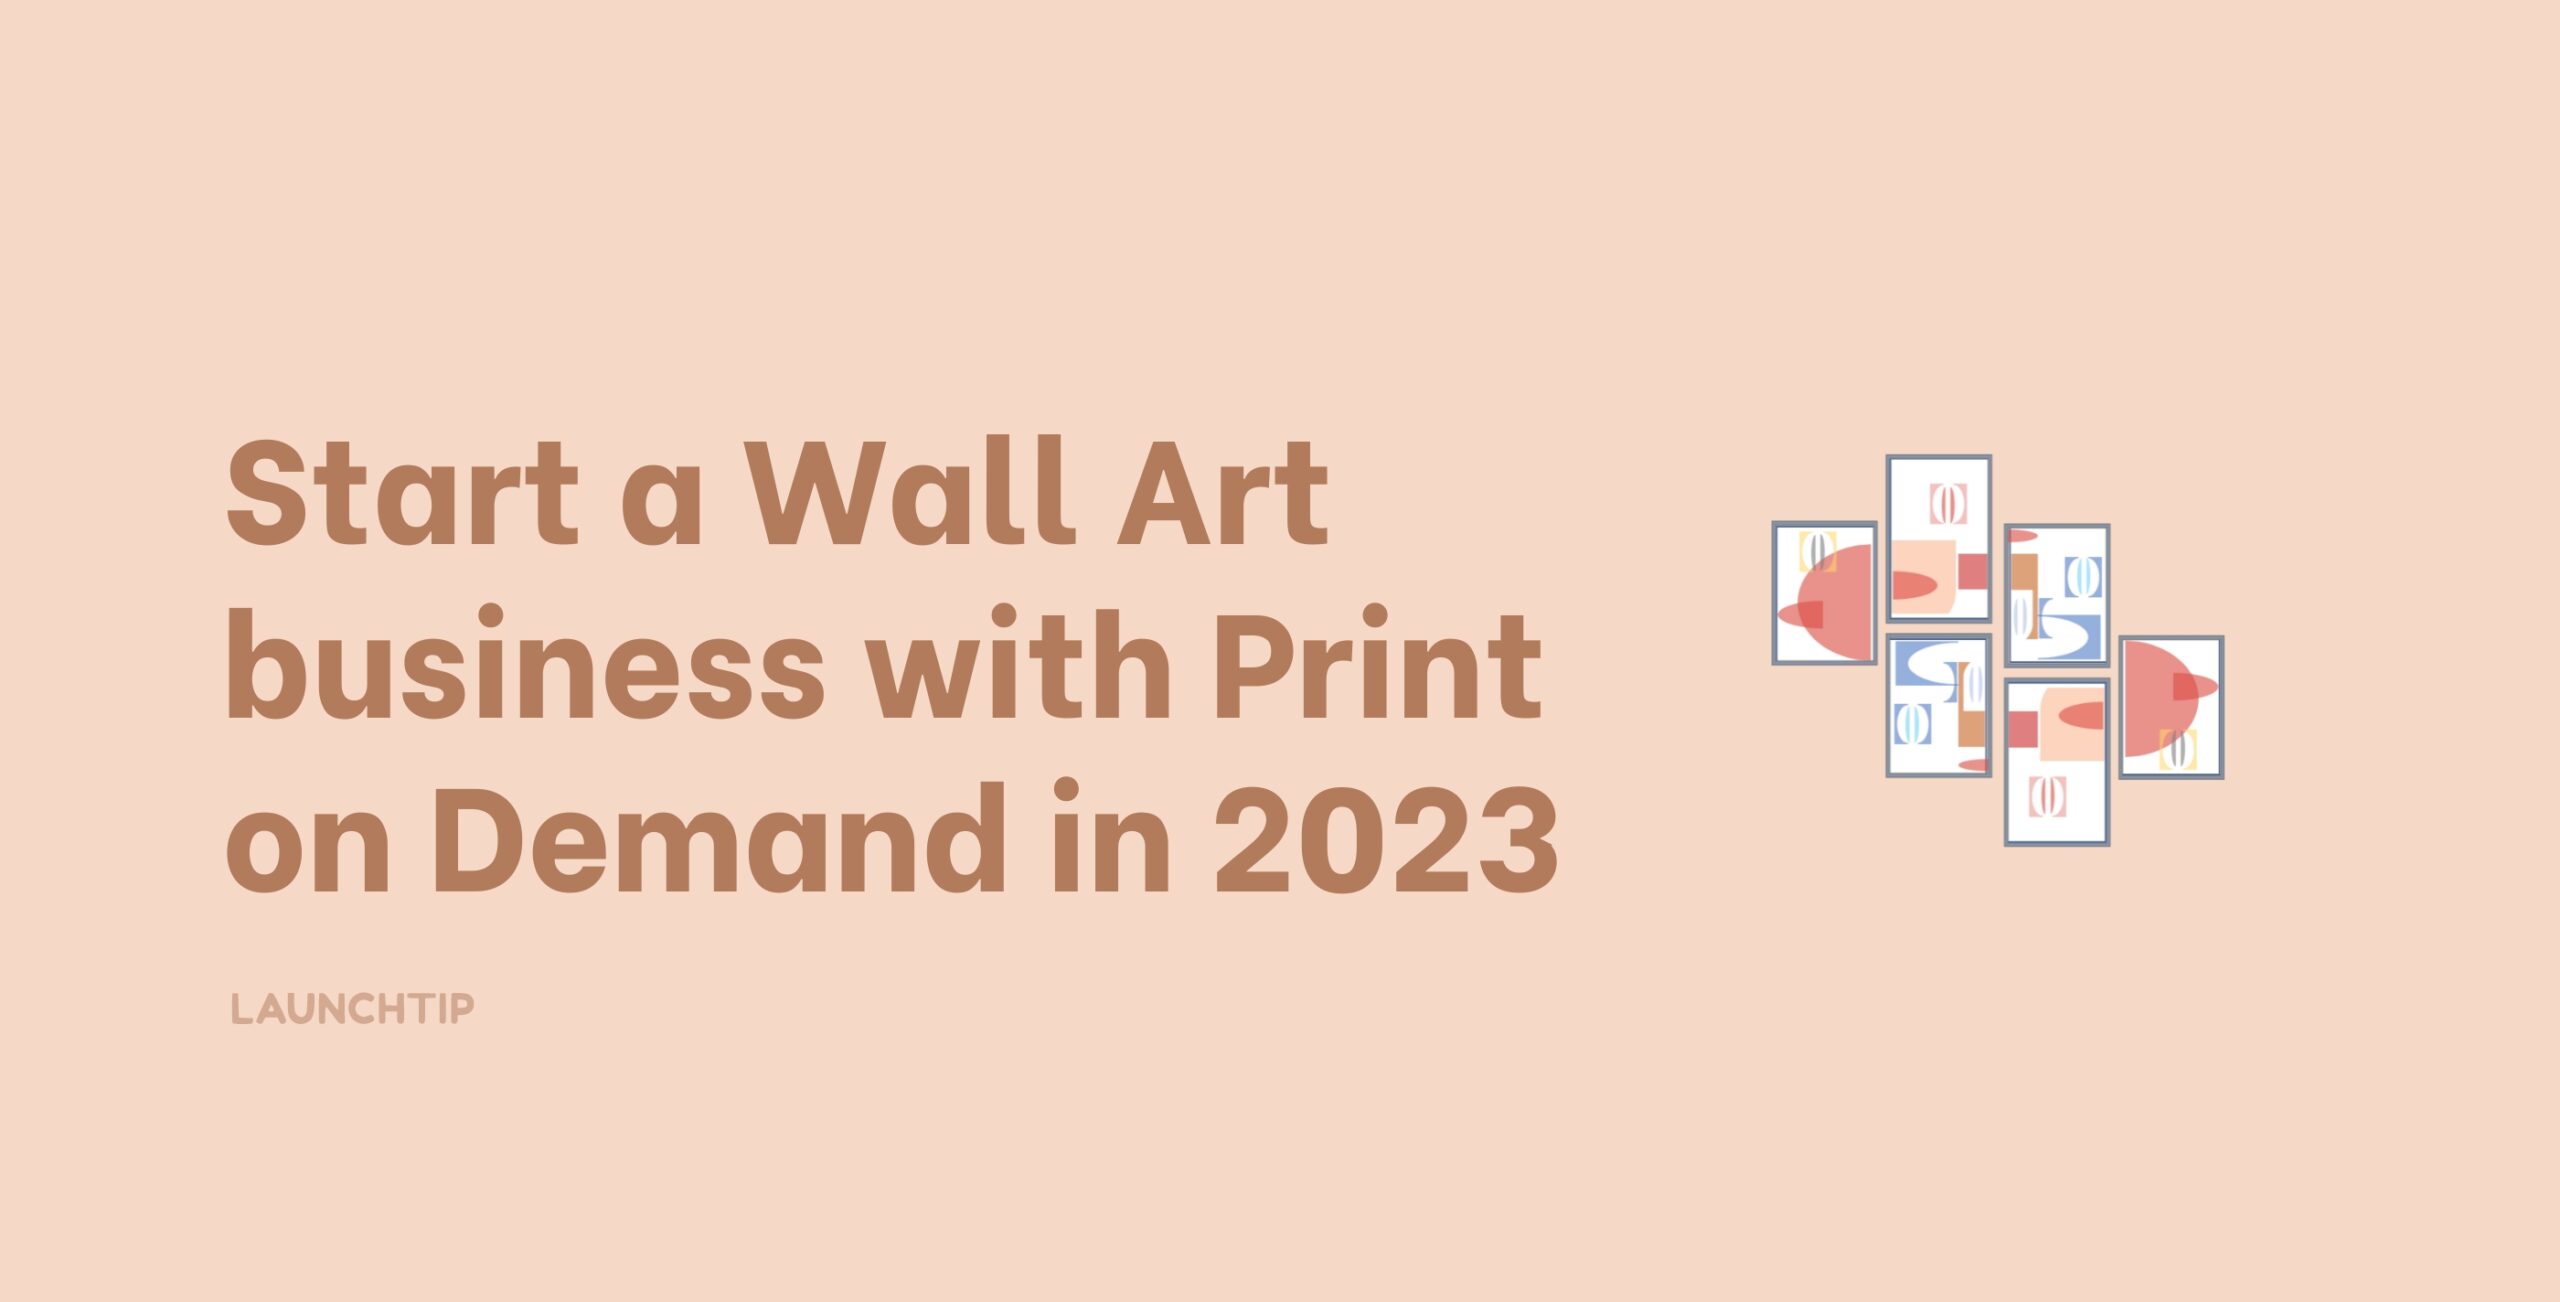 Start a Wall Art business with Print on Demand in 2023